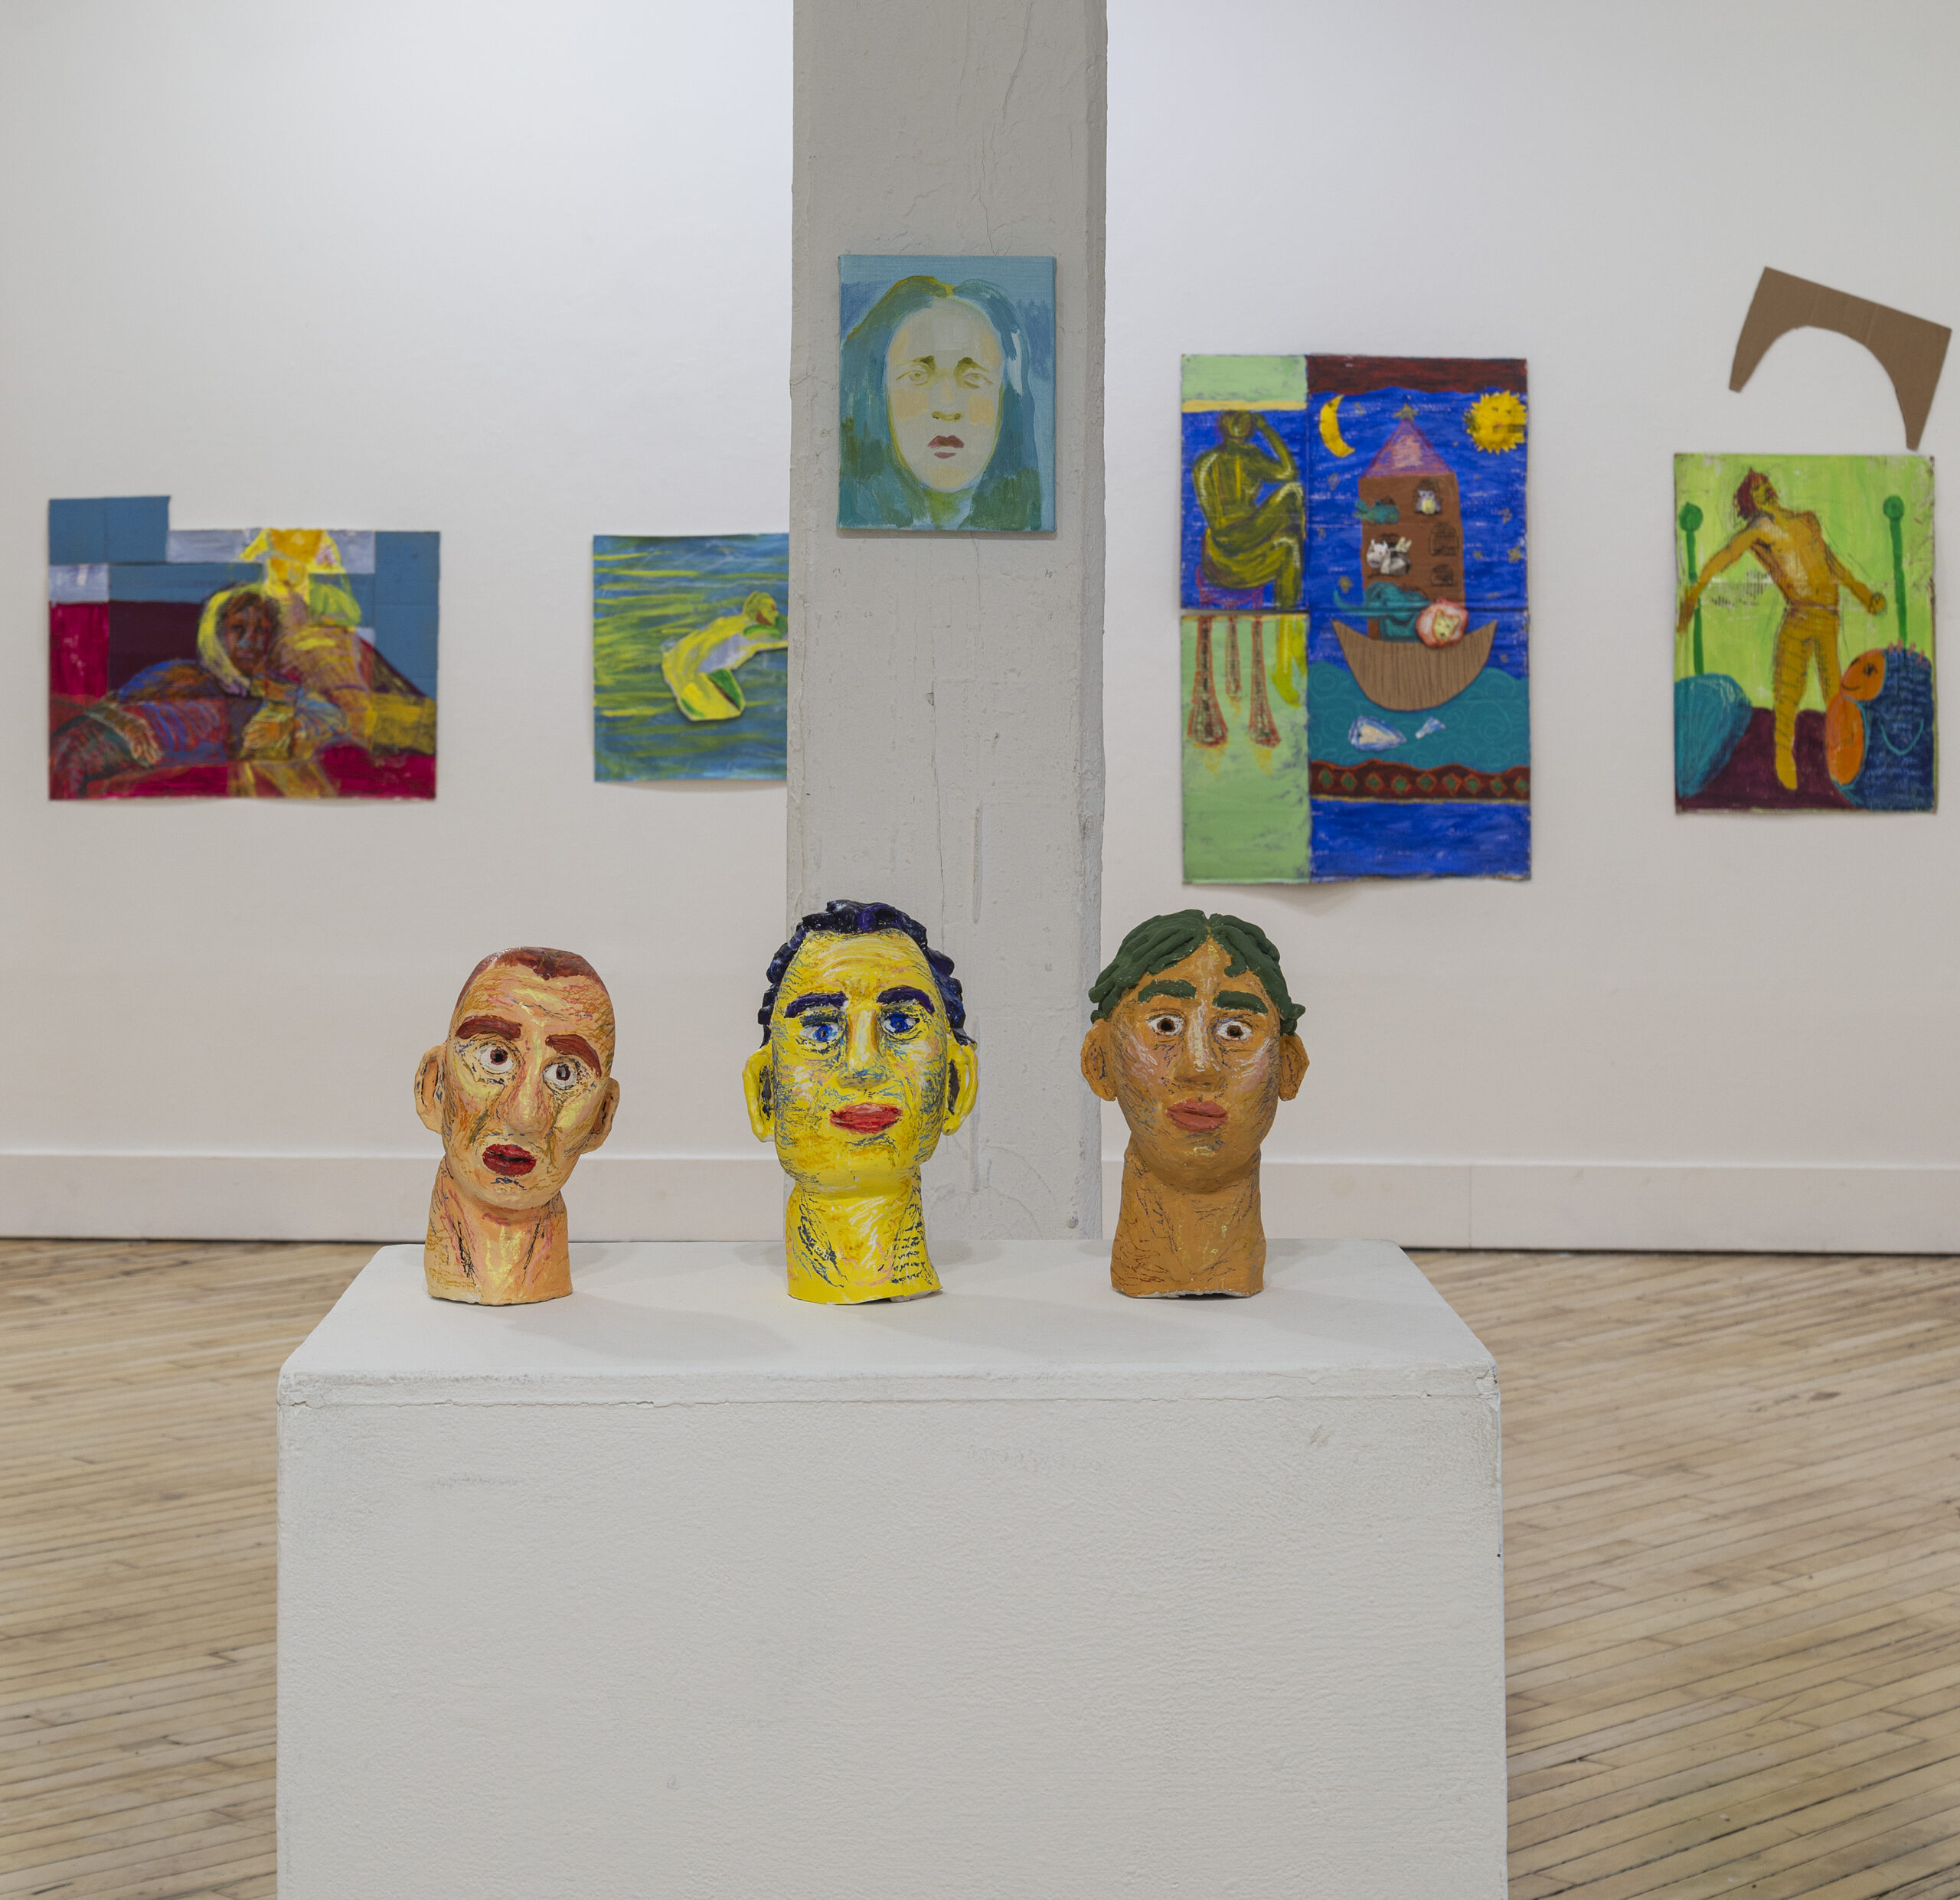 sculptures of faces on a display table in foreground, gallery room with paintings similar to the sculptures in background